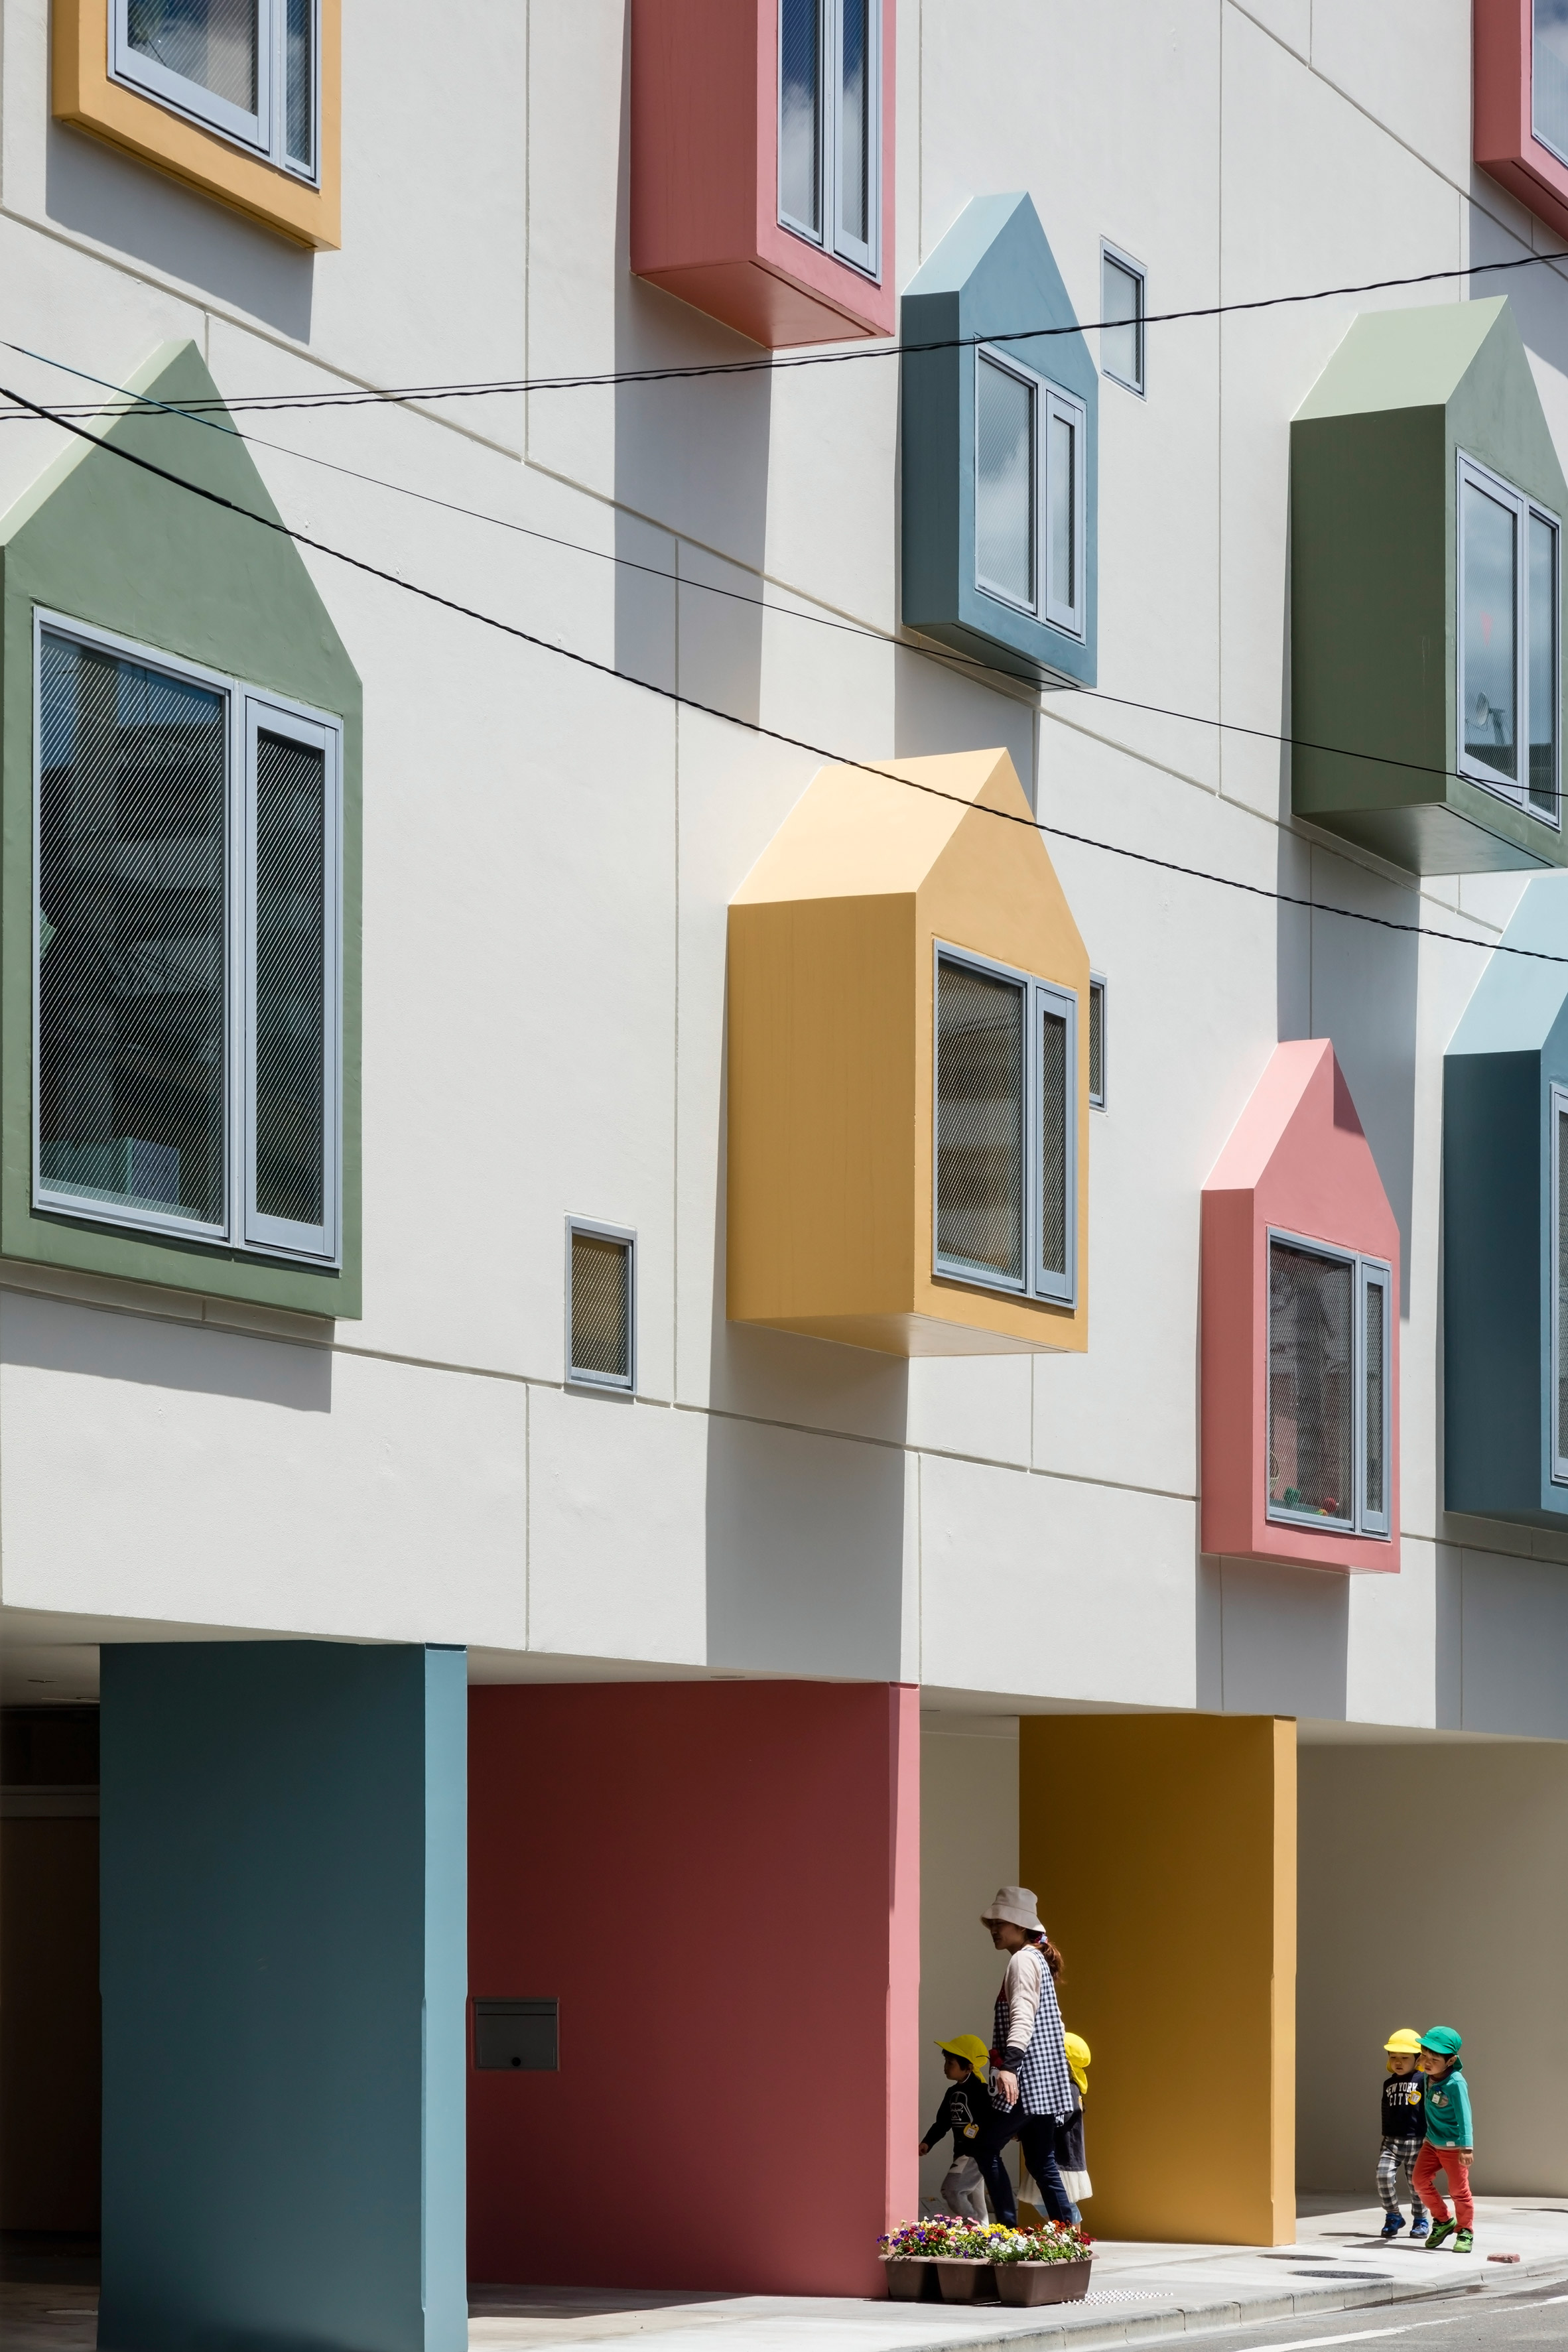 Colourful house-shaped boxes surround windows at nursery school in northern Japan 